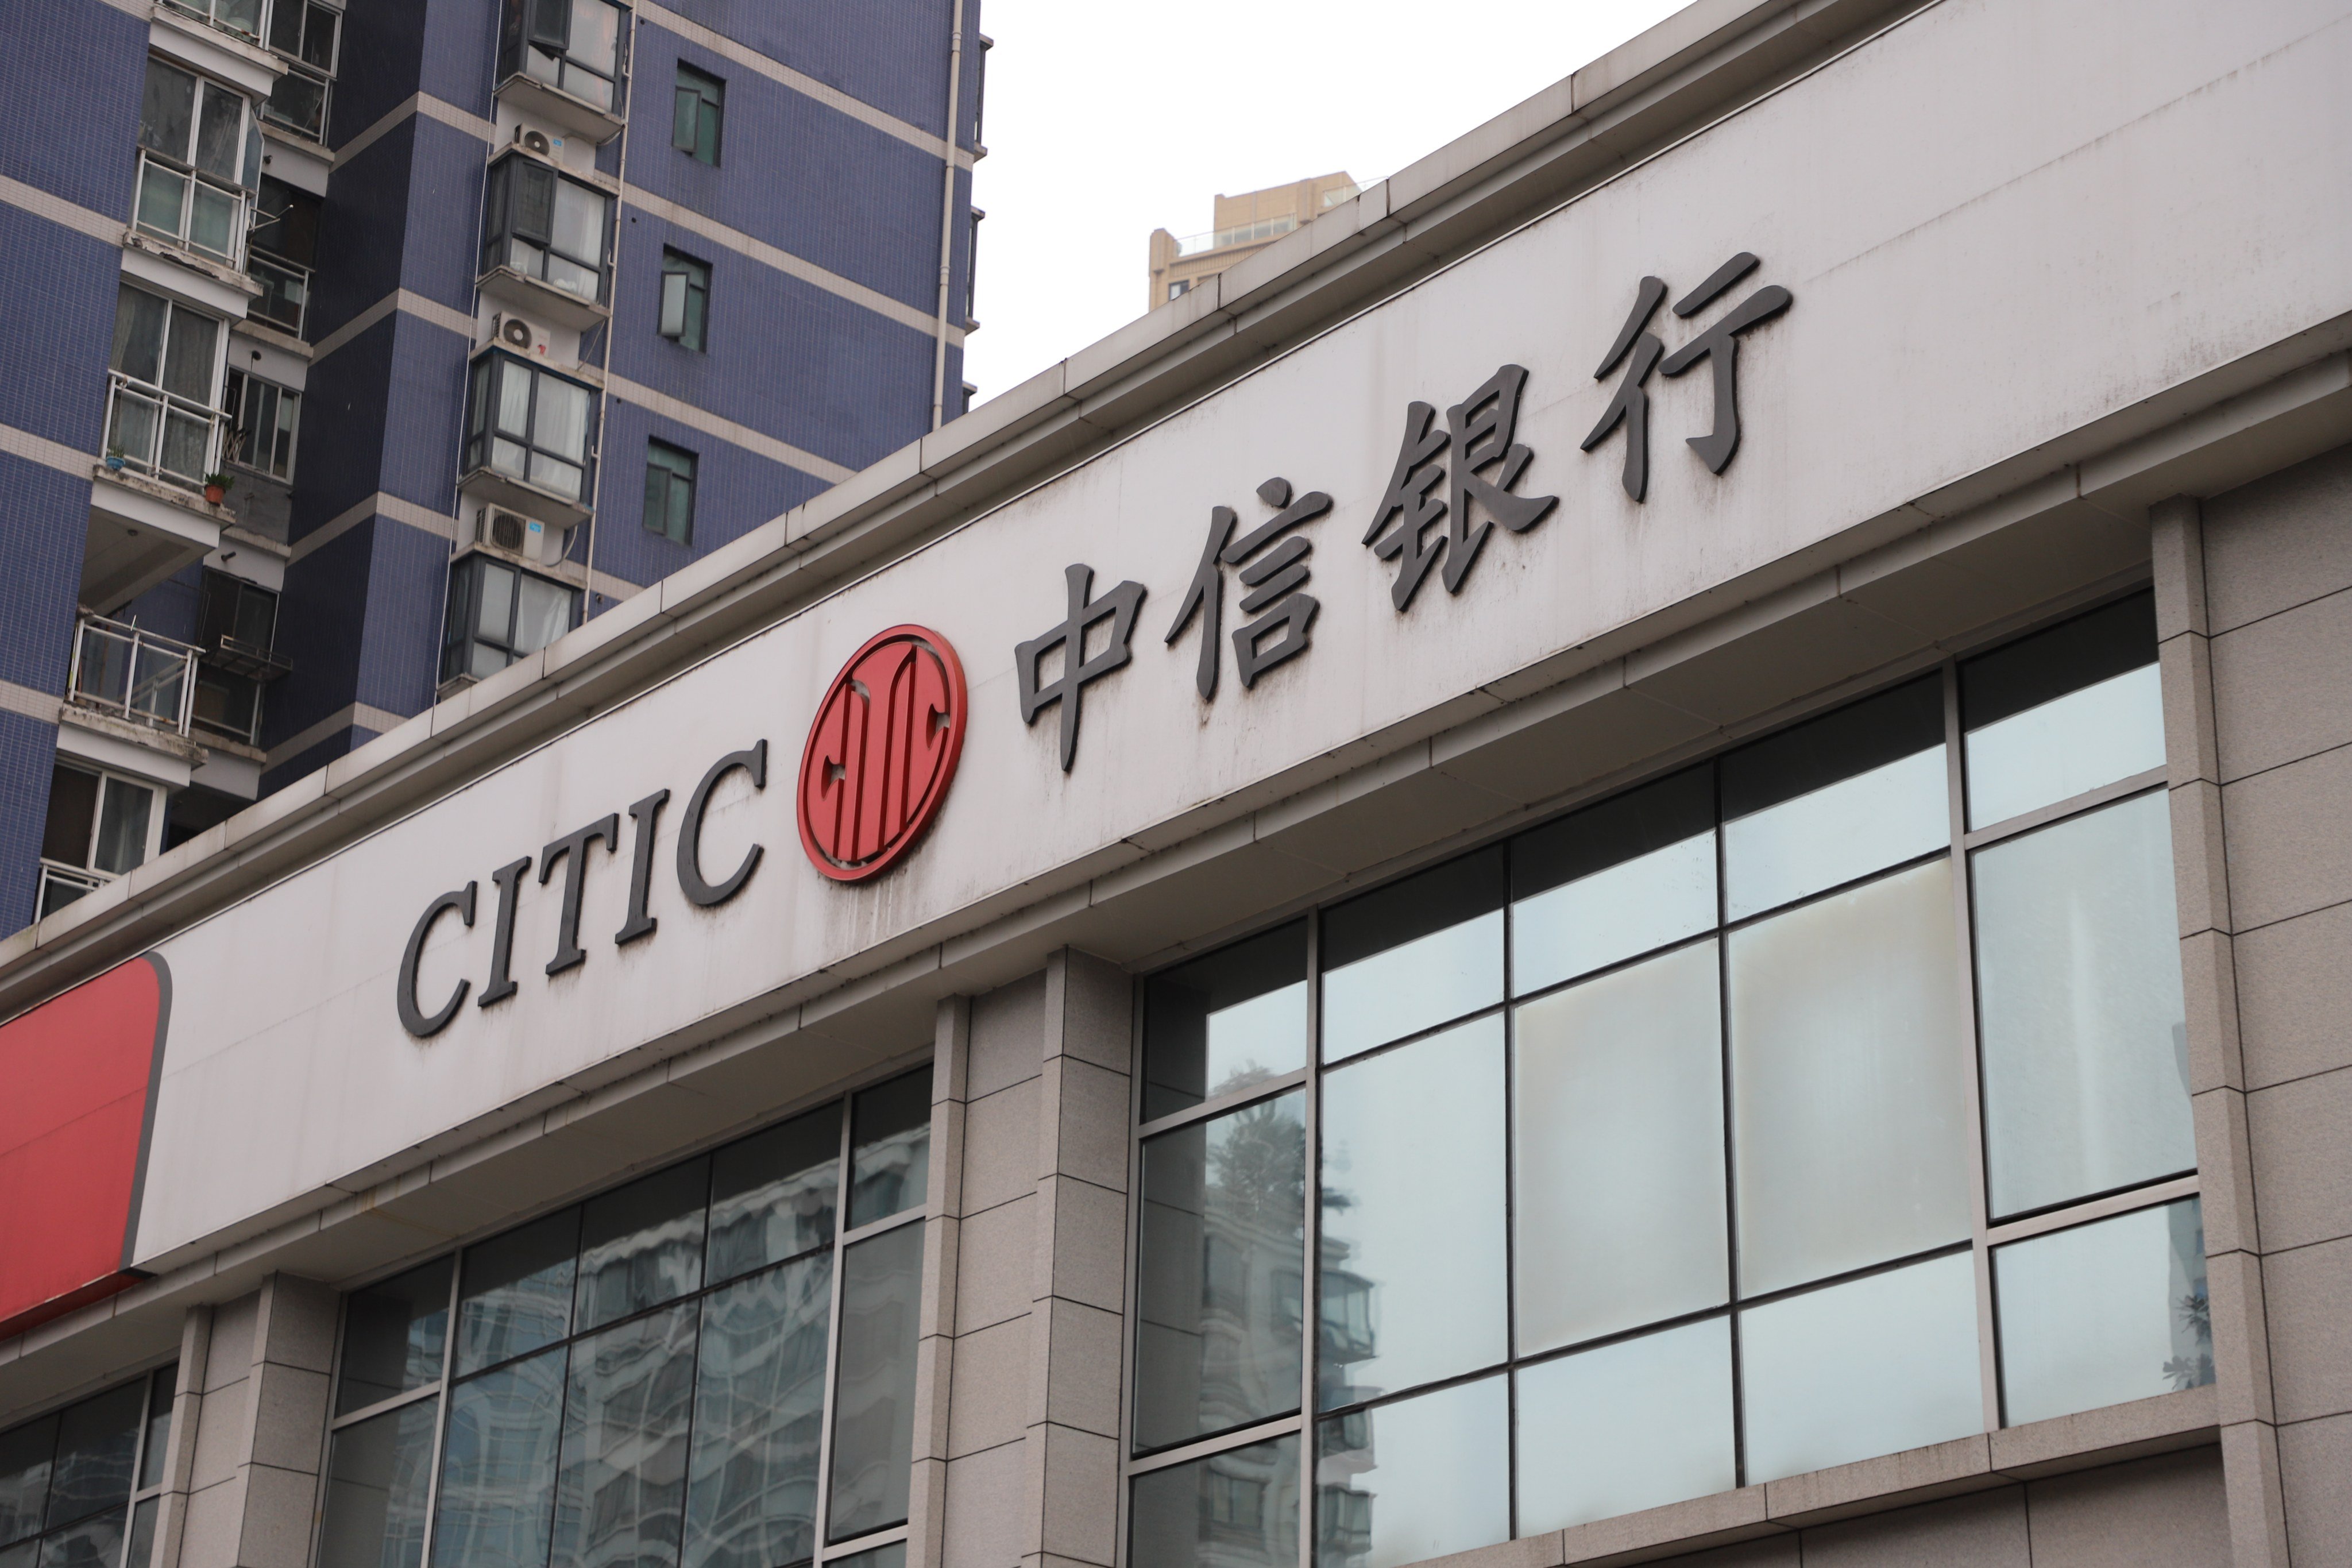 A branch of China CITIC Bank in Yichang, Hubei province, China. Photo: Getty Images